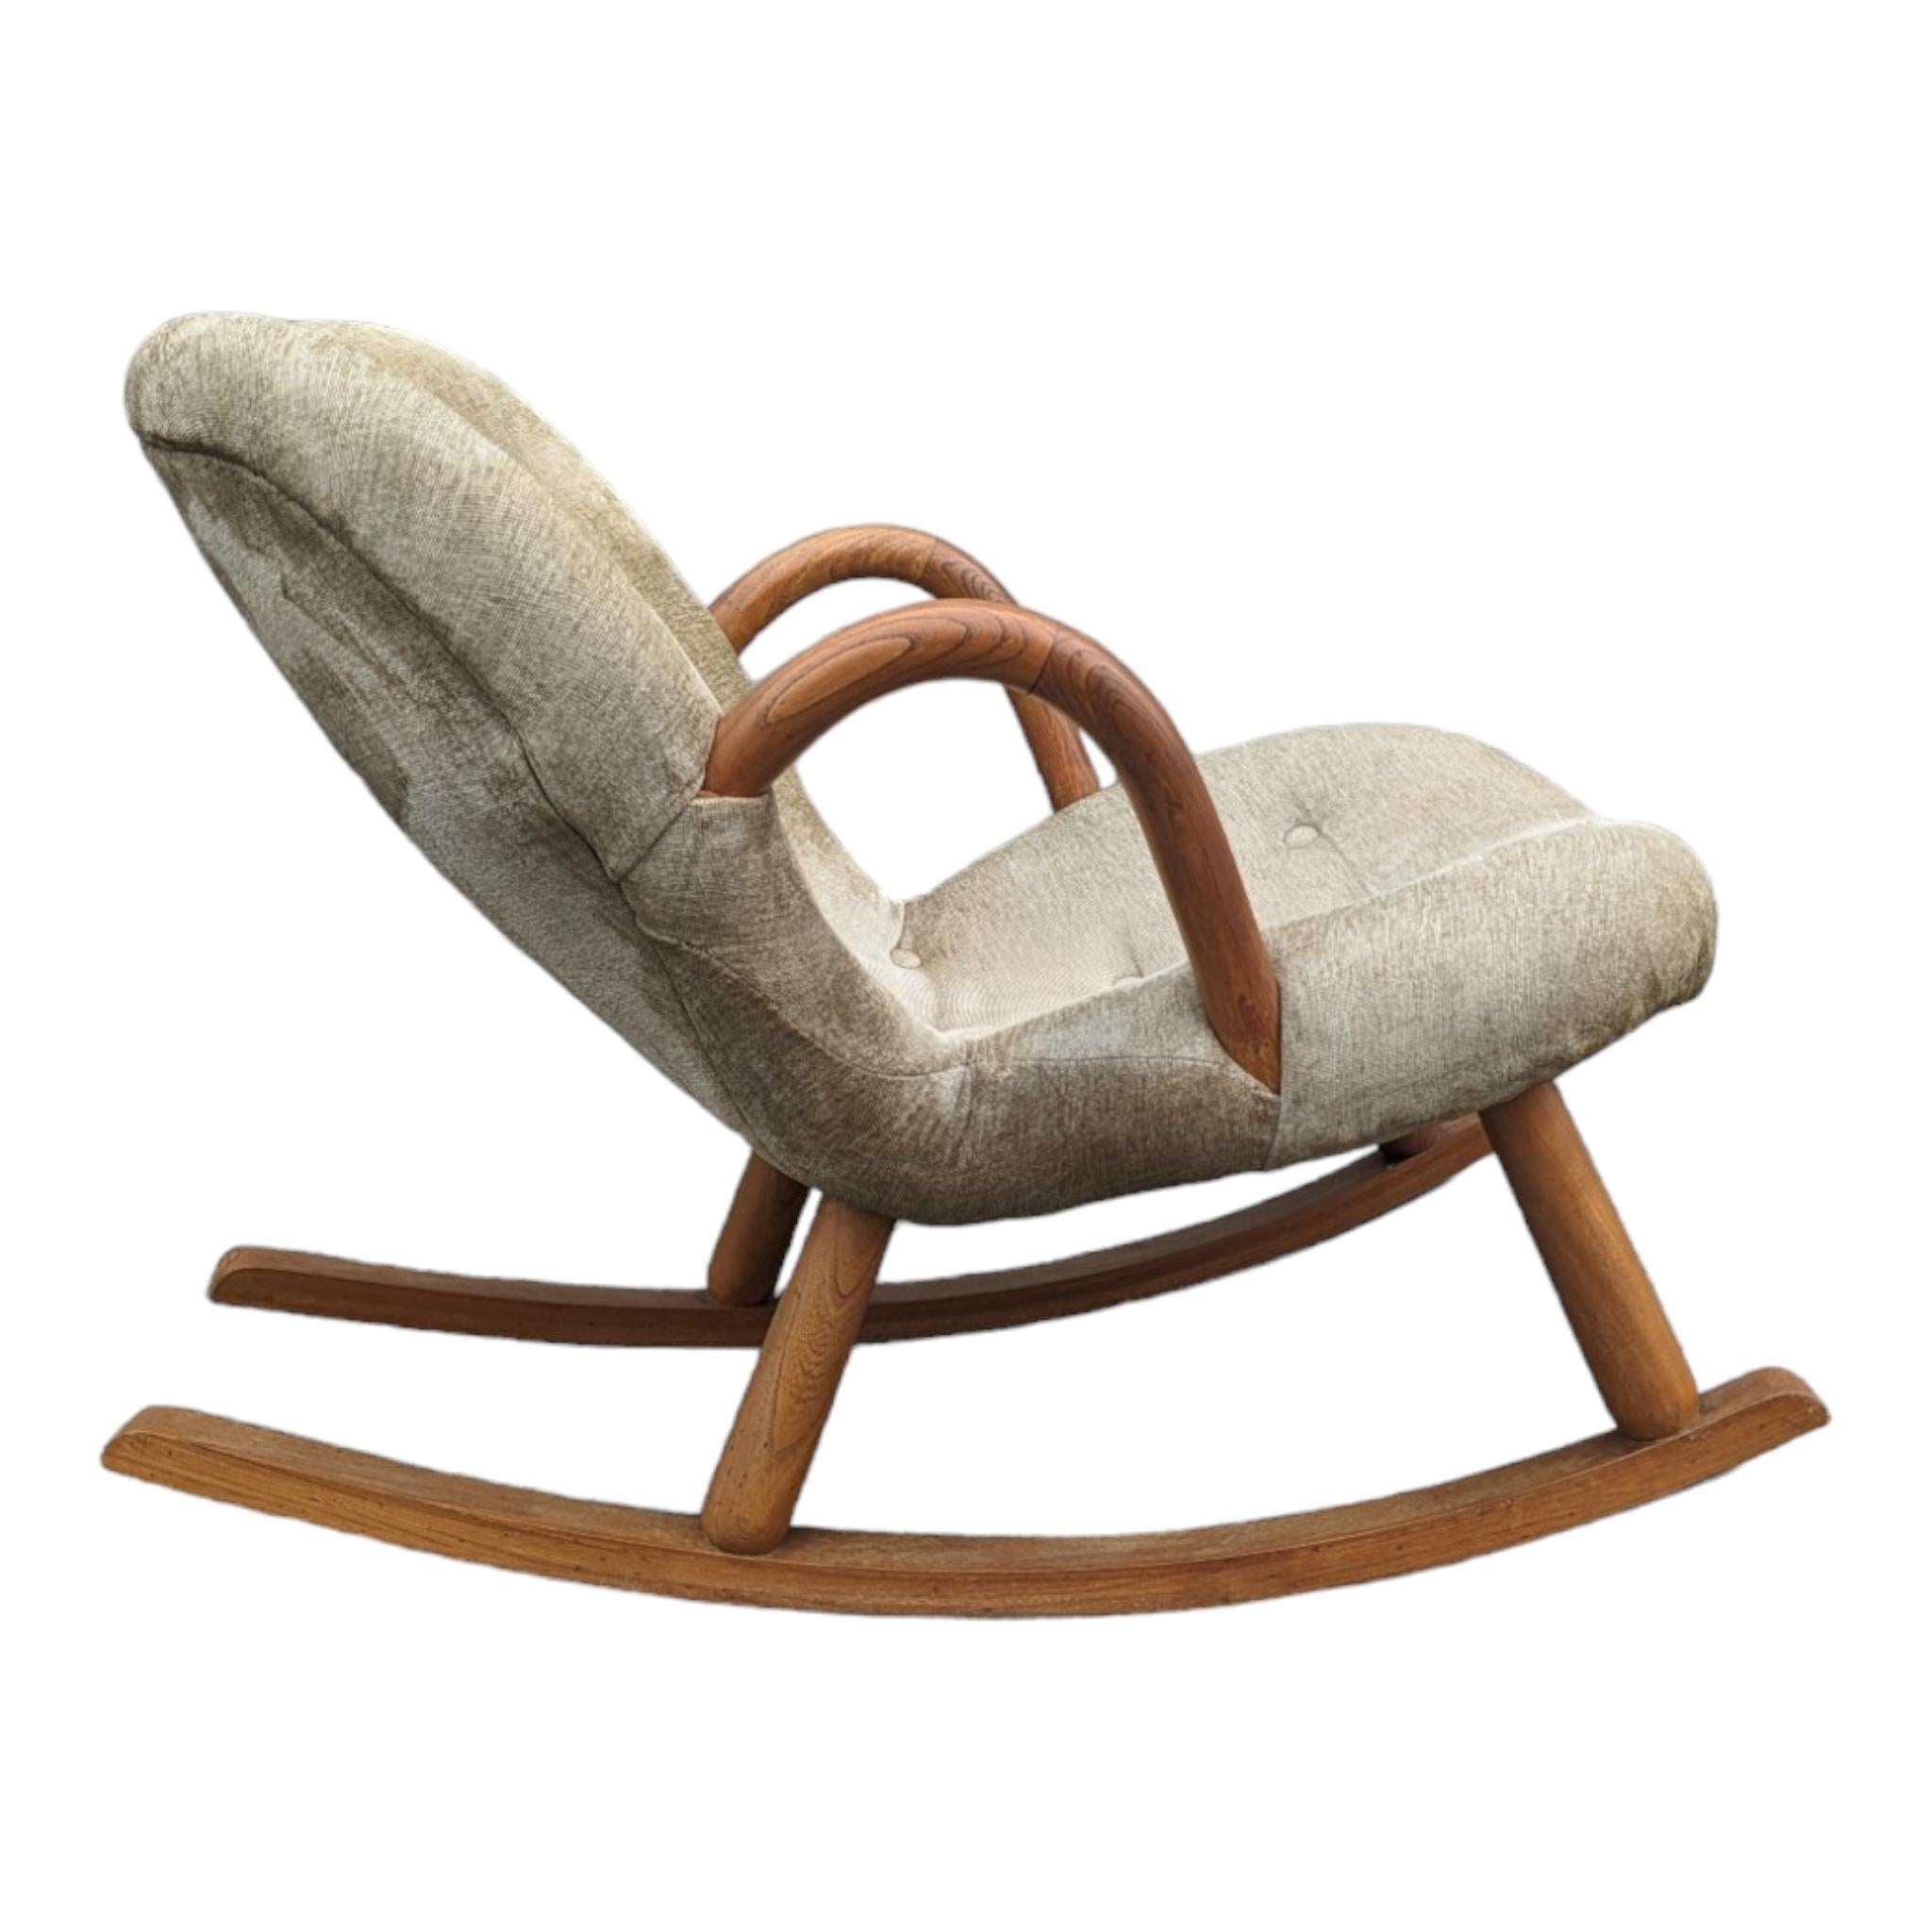 20th Century Rare Arnold Madsen Attributed Clam Rocking Chair circa 1960s For Sale